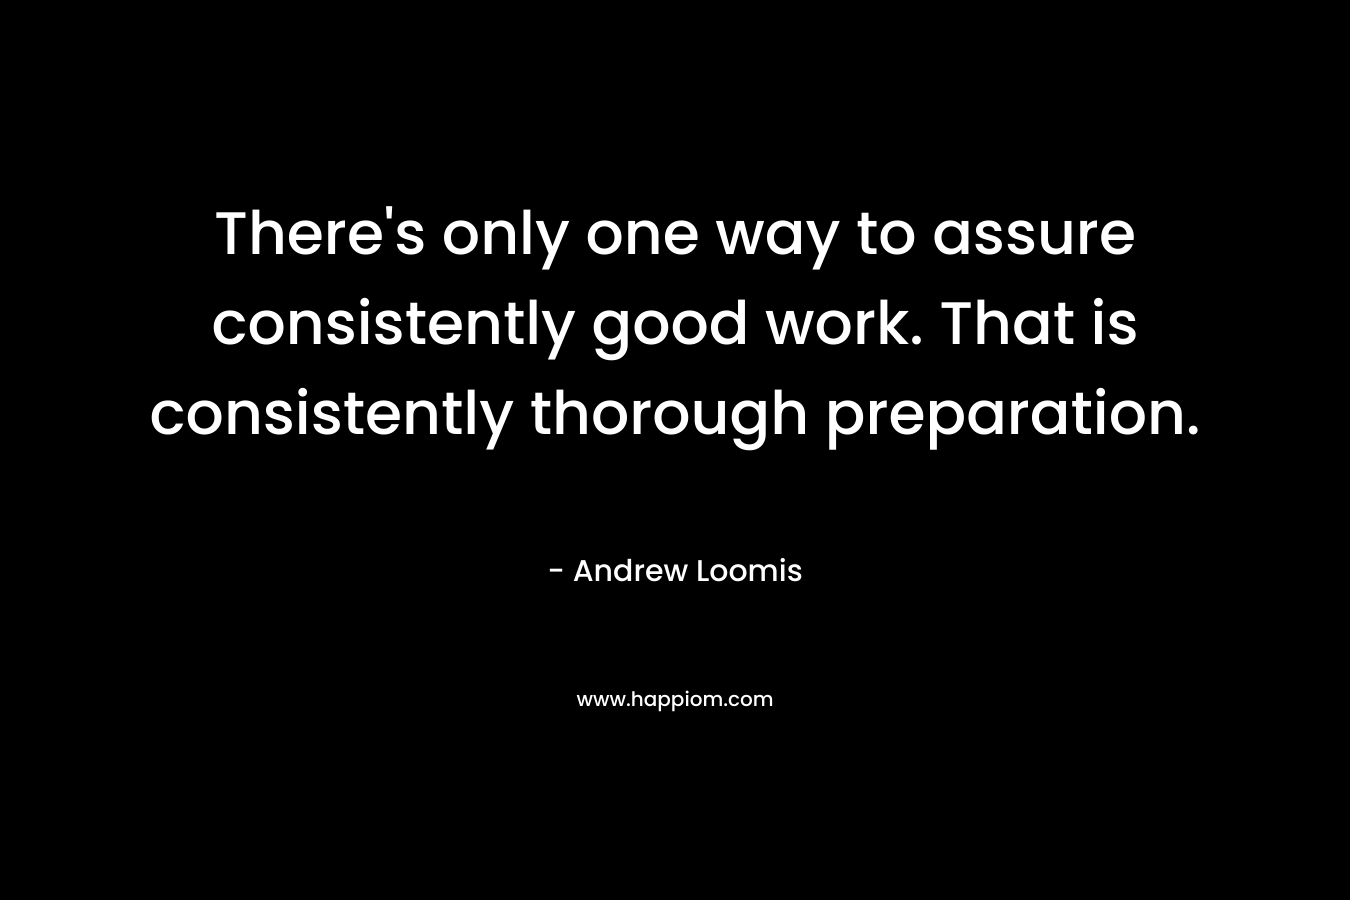 There's only one way to assure consistently good work. That is consistently thorough preparation.